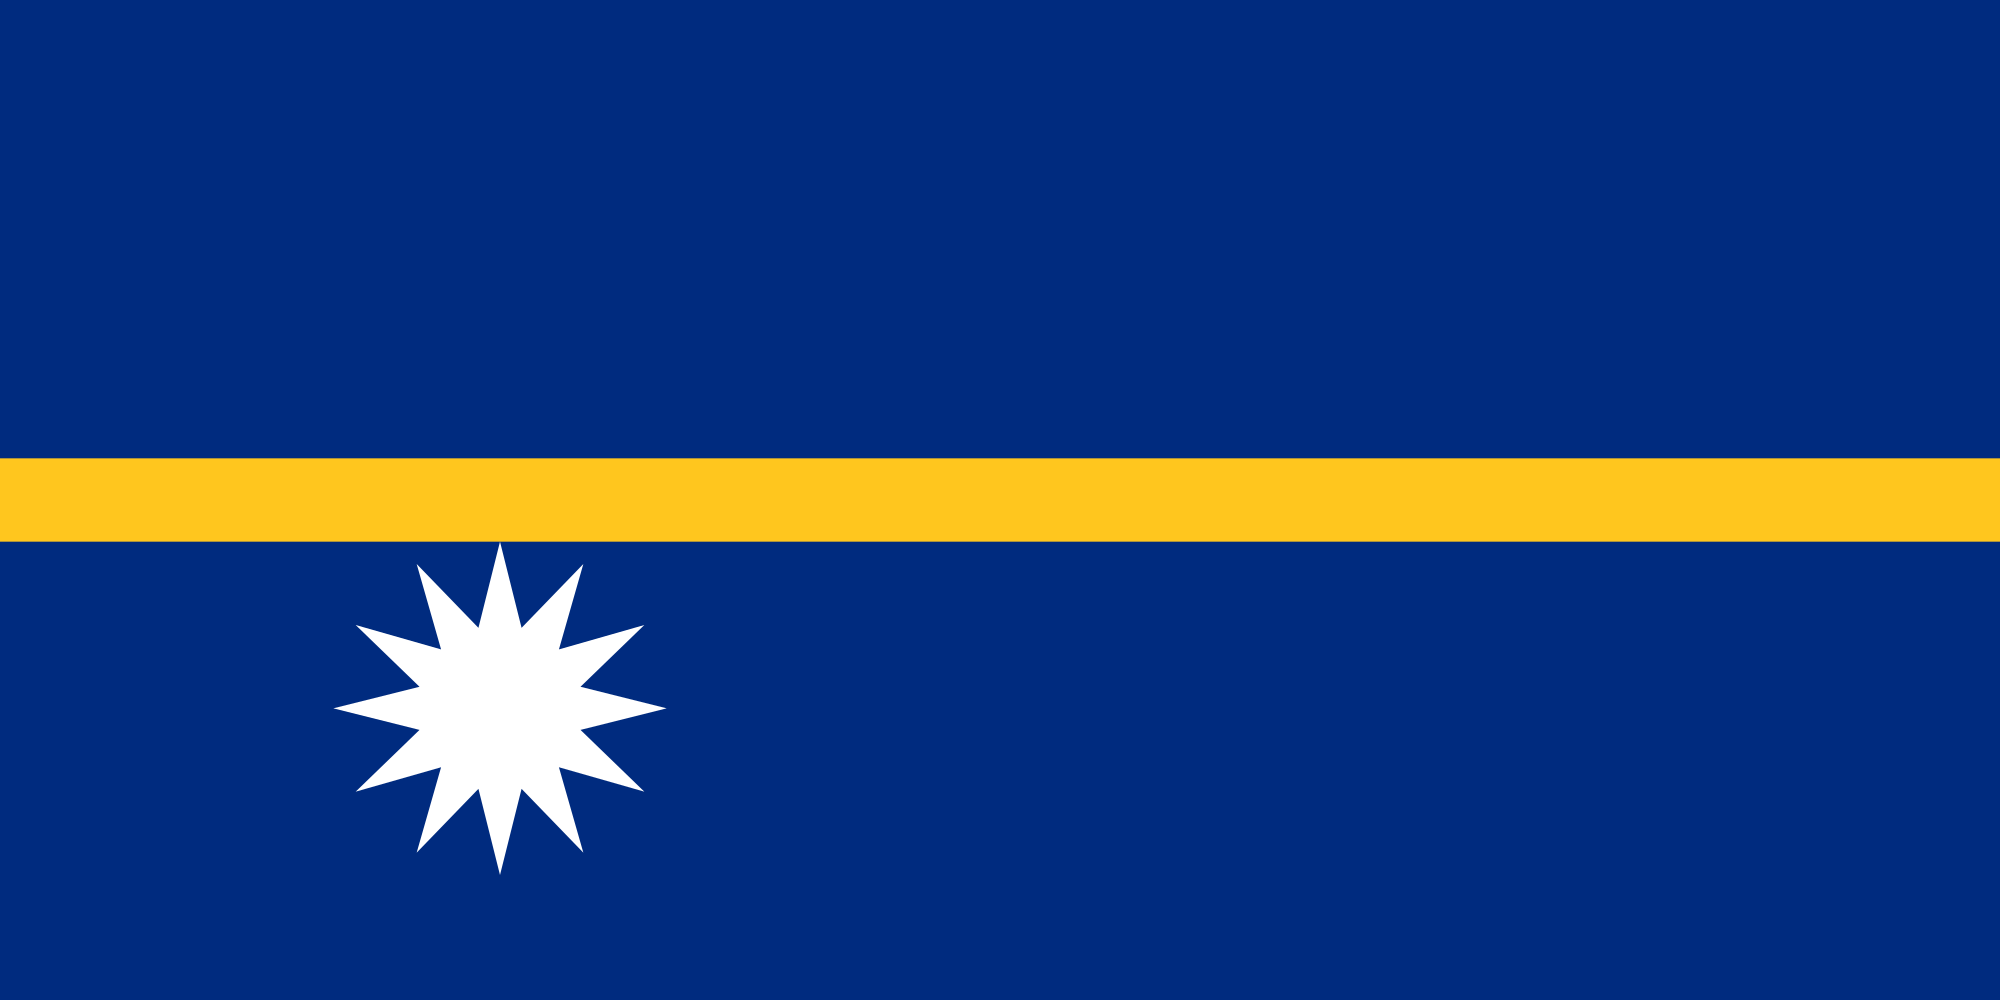 Which Country Flag Is This?